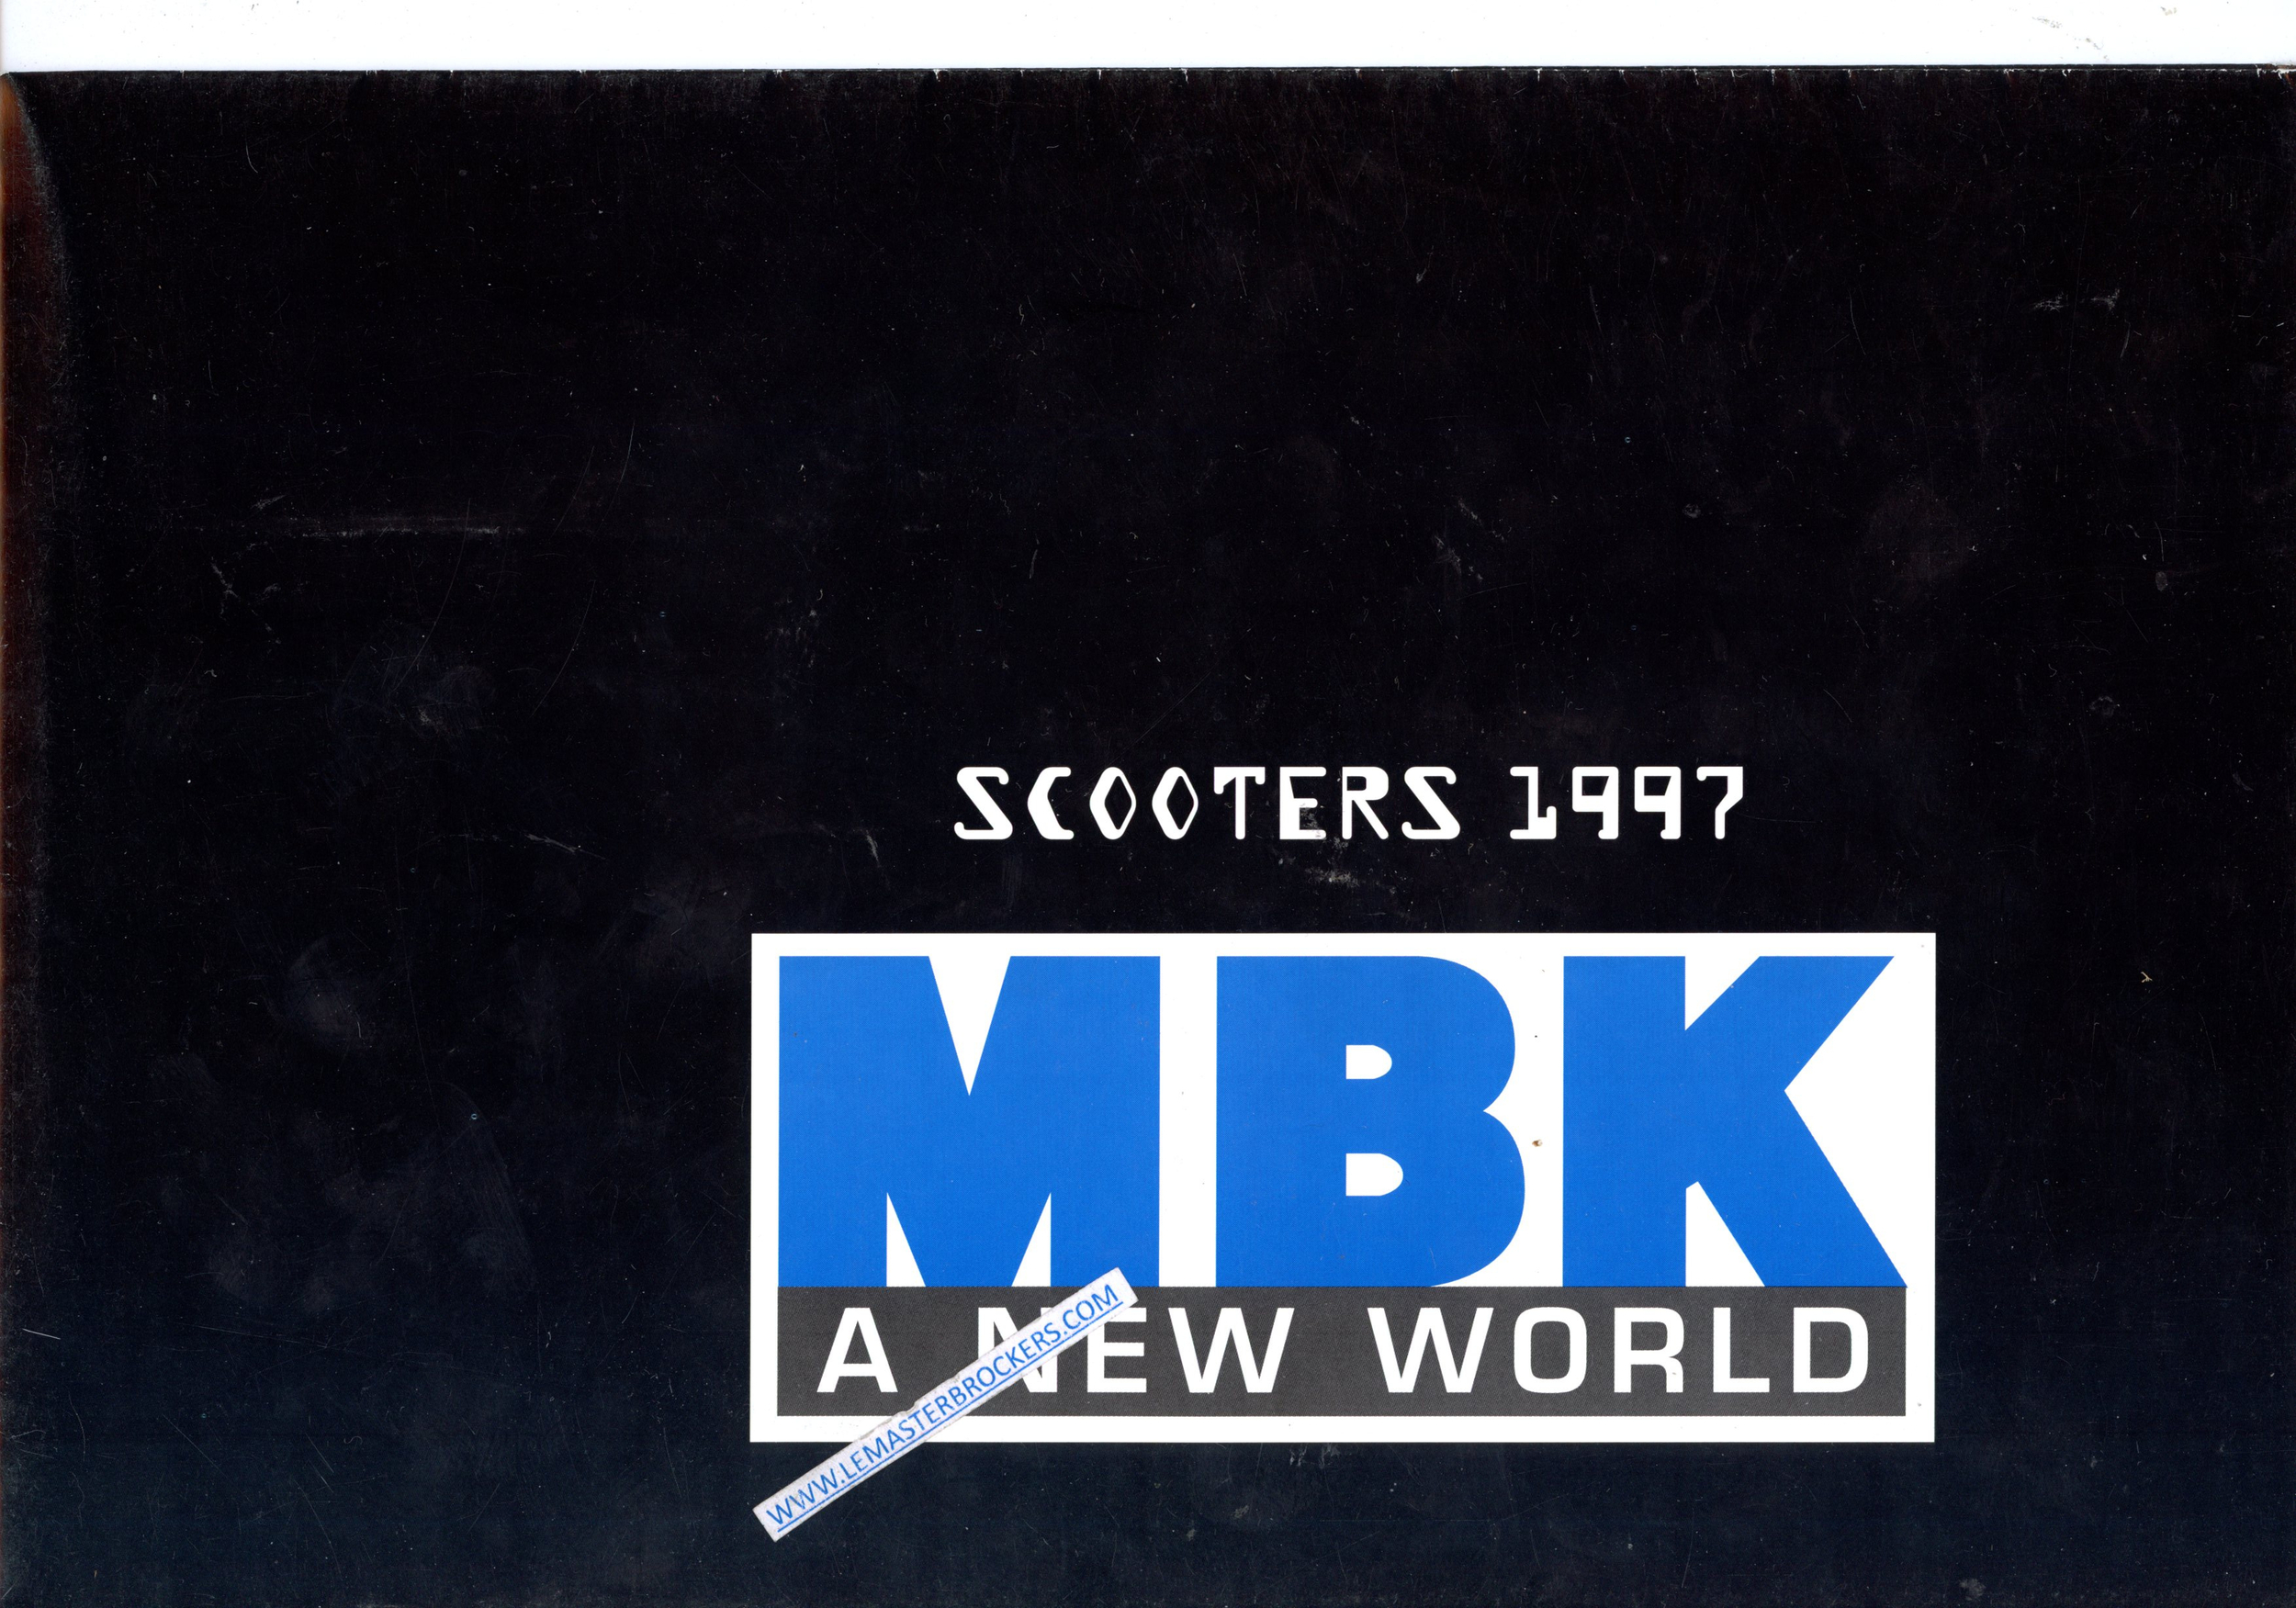 BROCHURE MBK SCOOTERS 1997 - POSTER PUBLICITAIRE